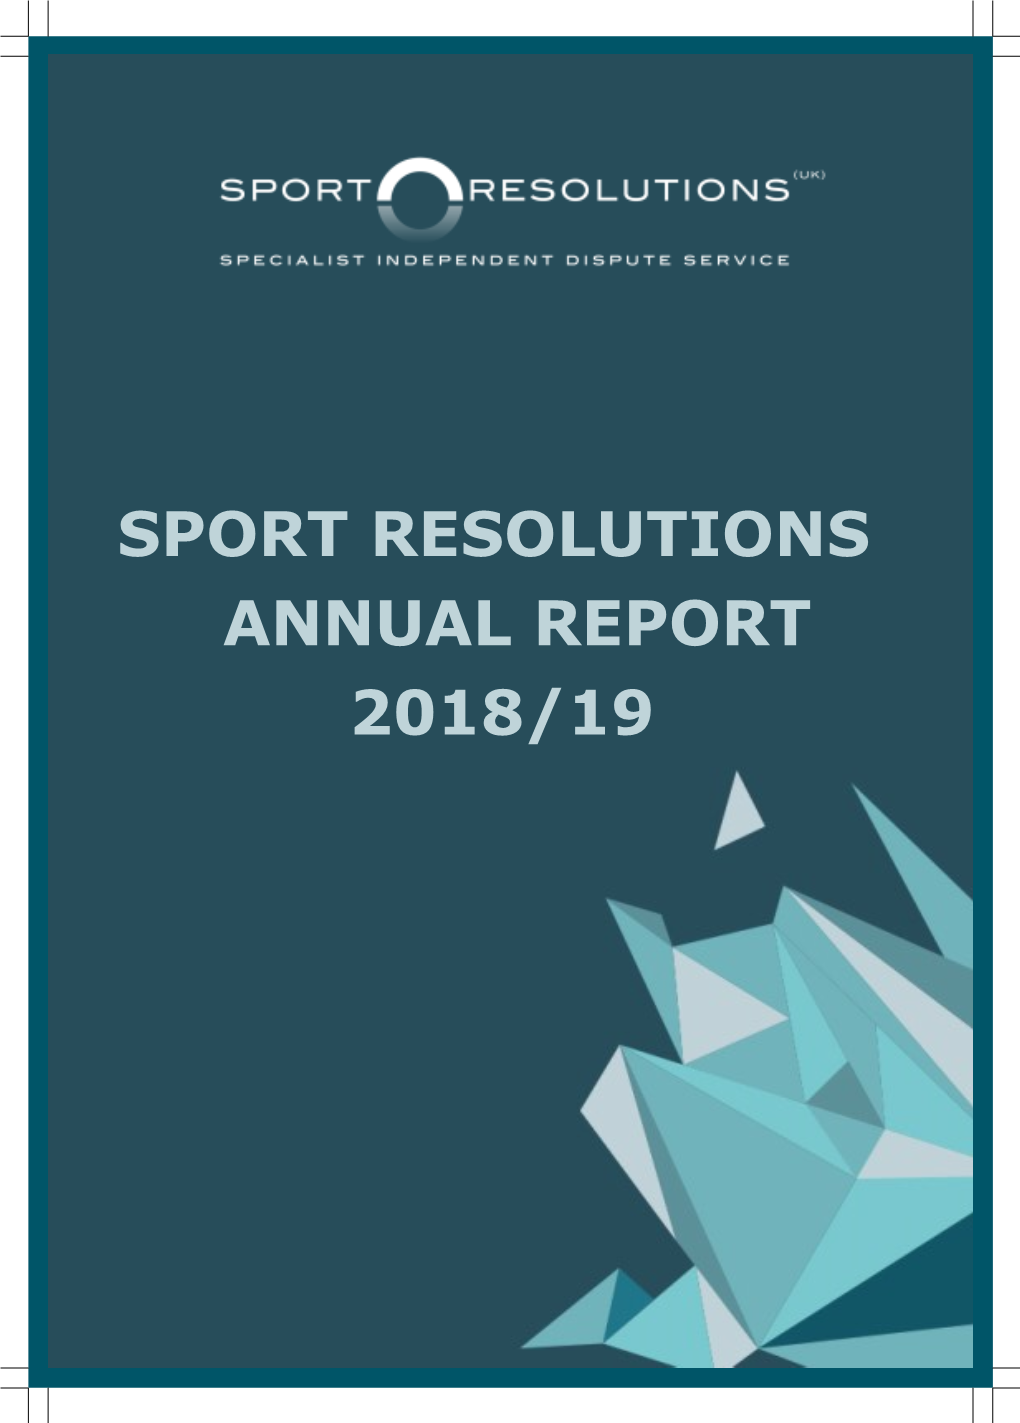 Sport Resolutions Annual Report 2018/19